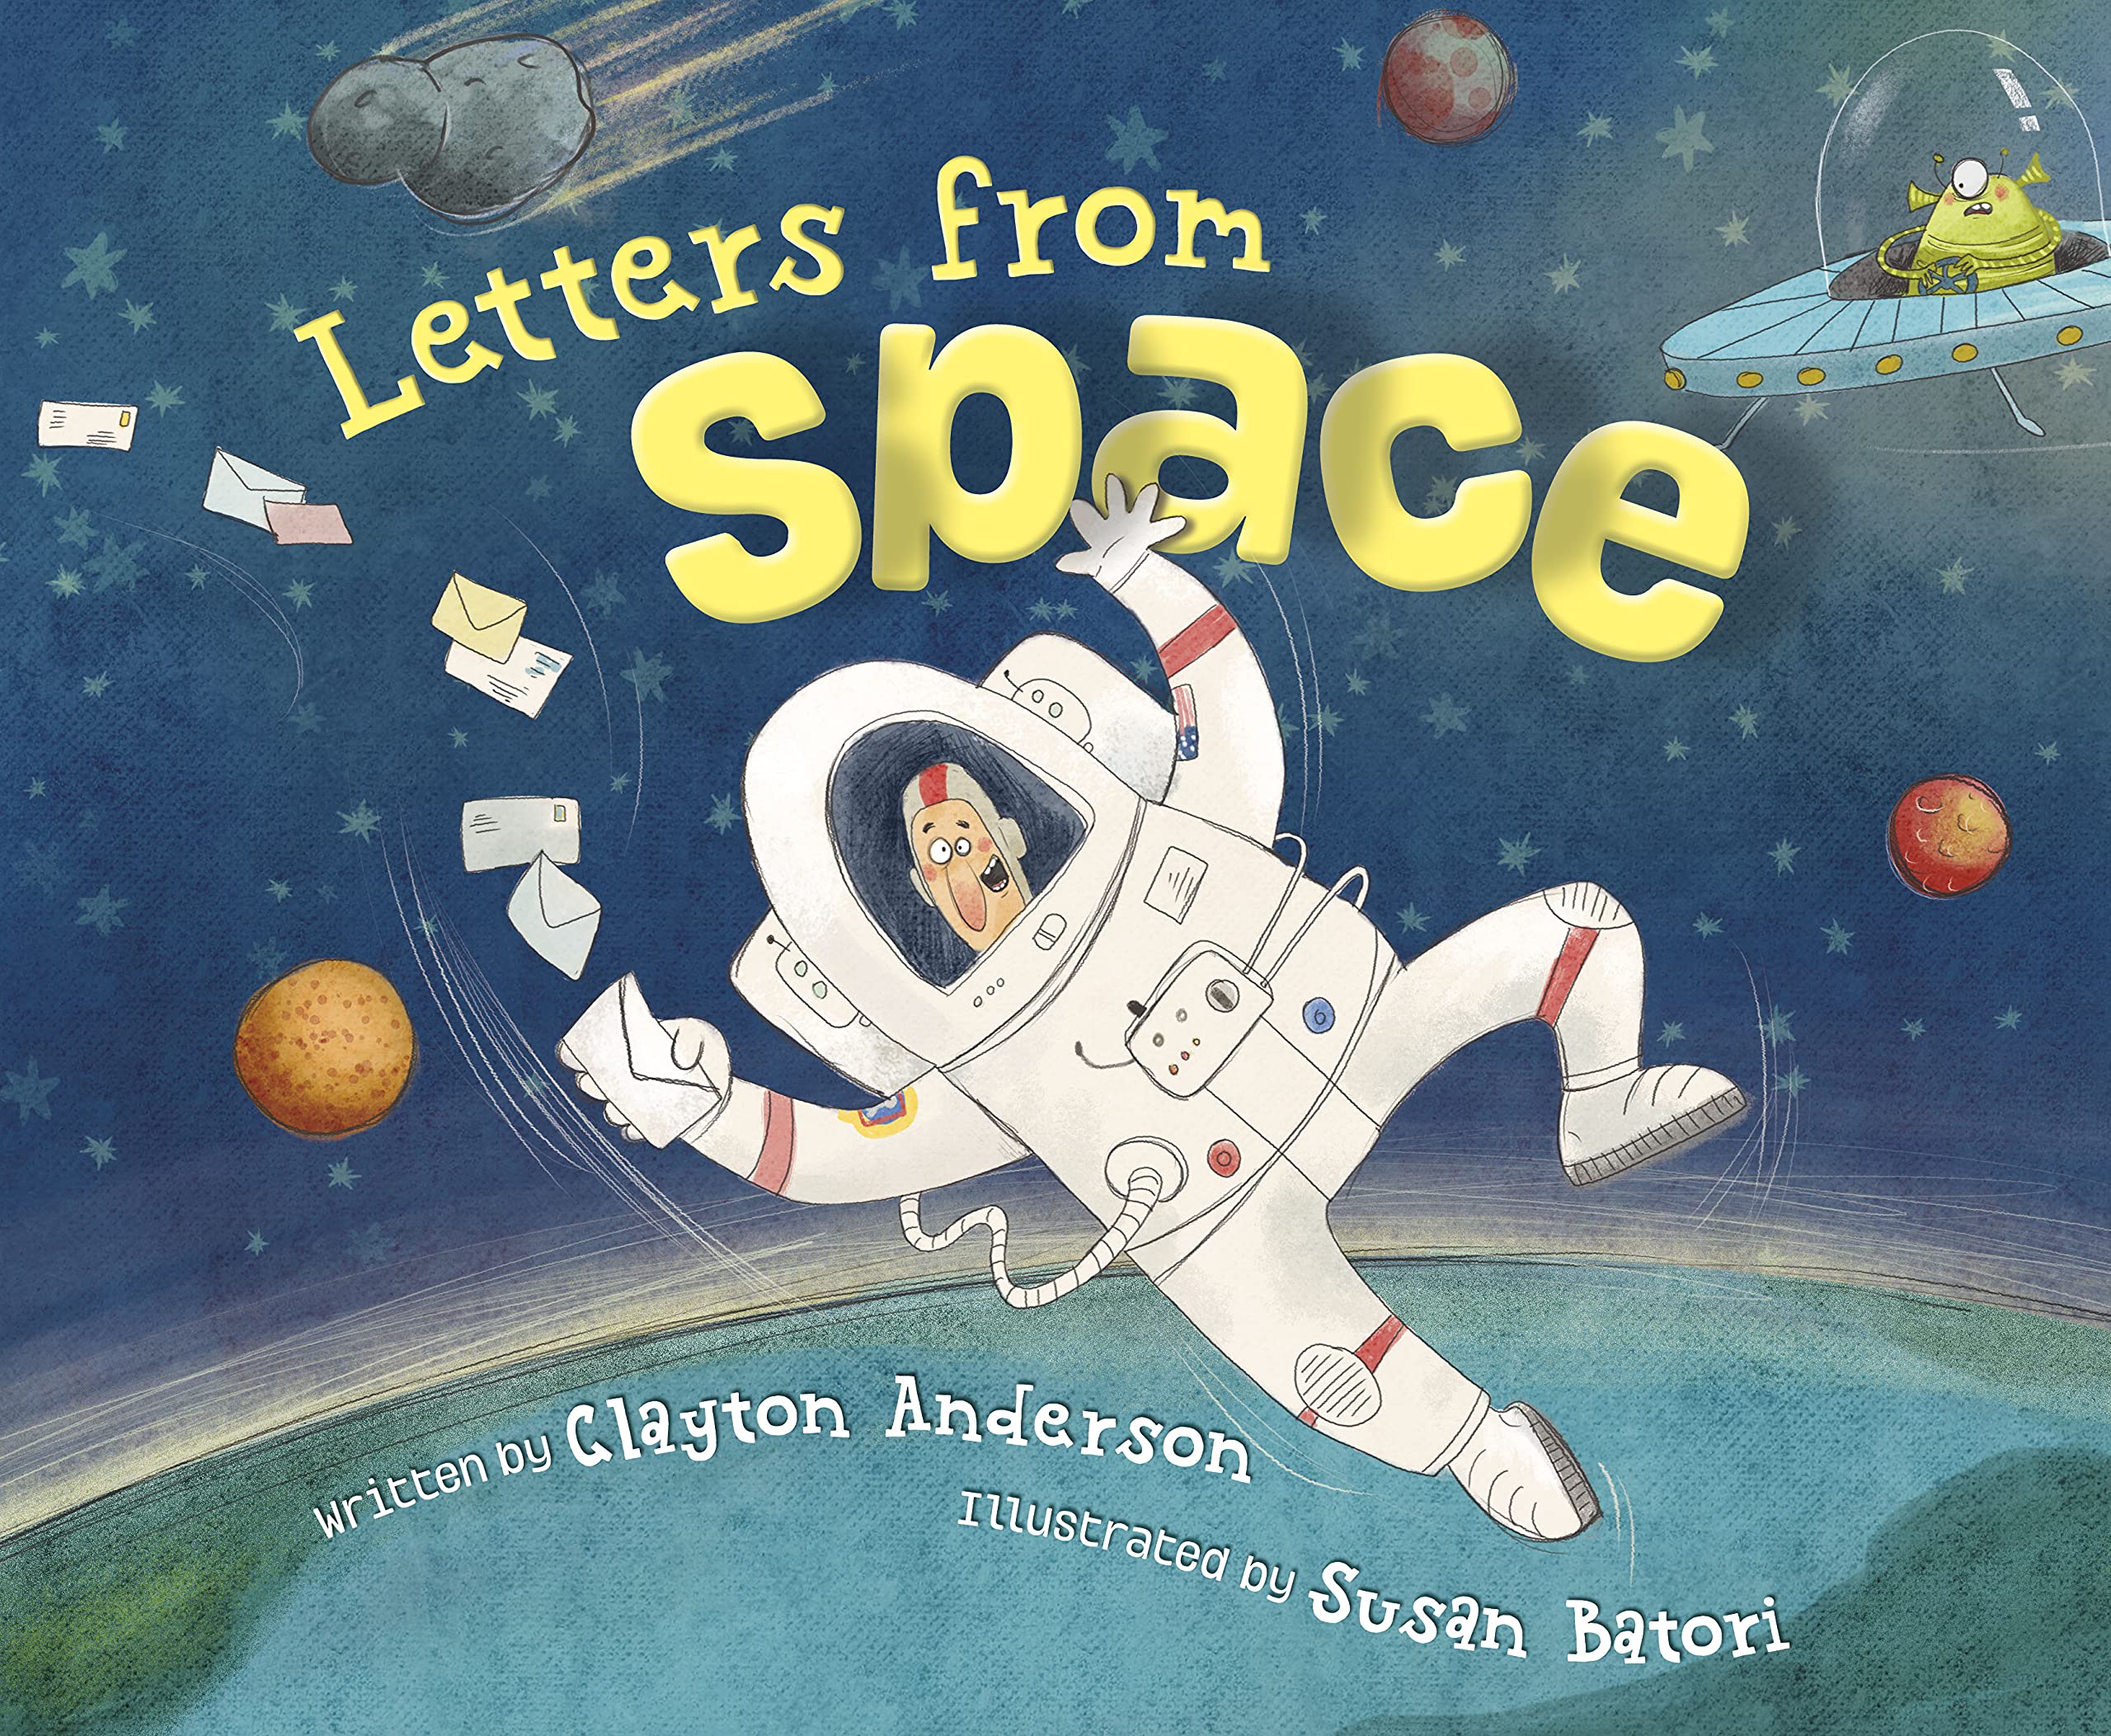 Letters from Space by Clayton Anderson